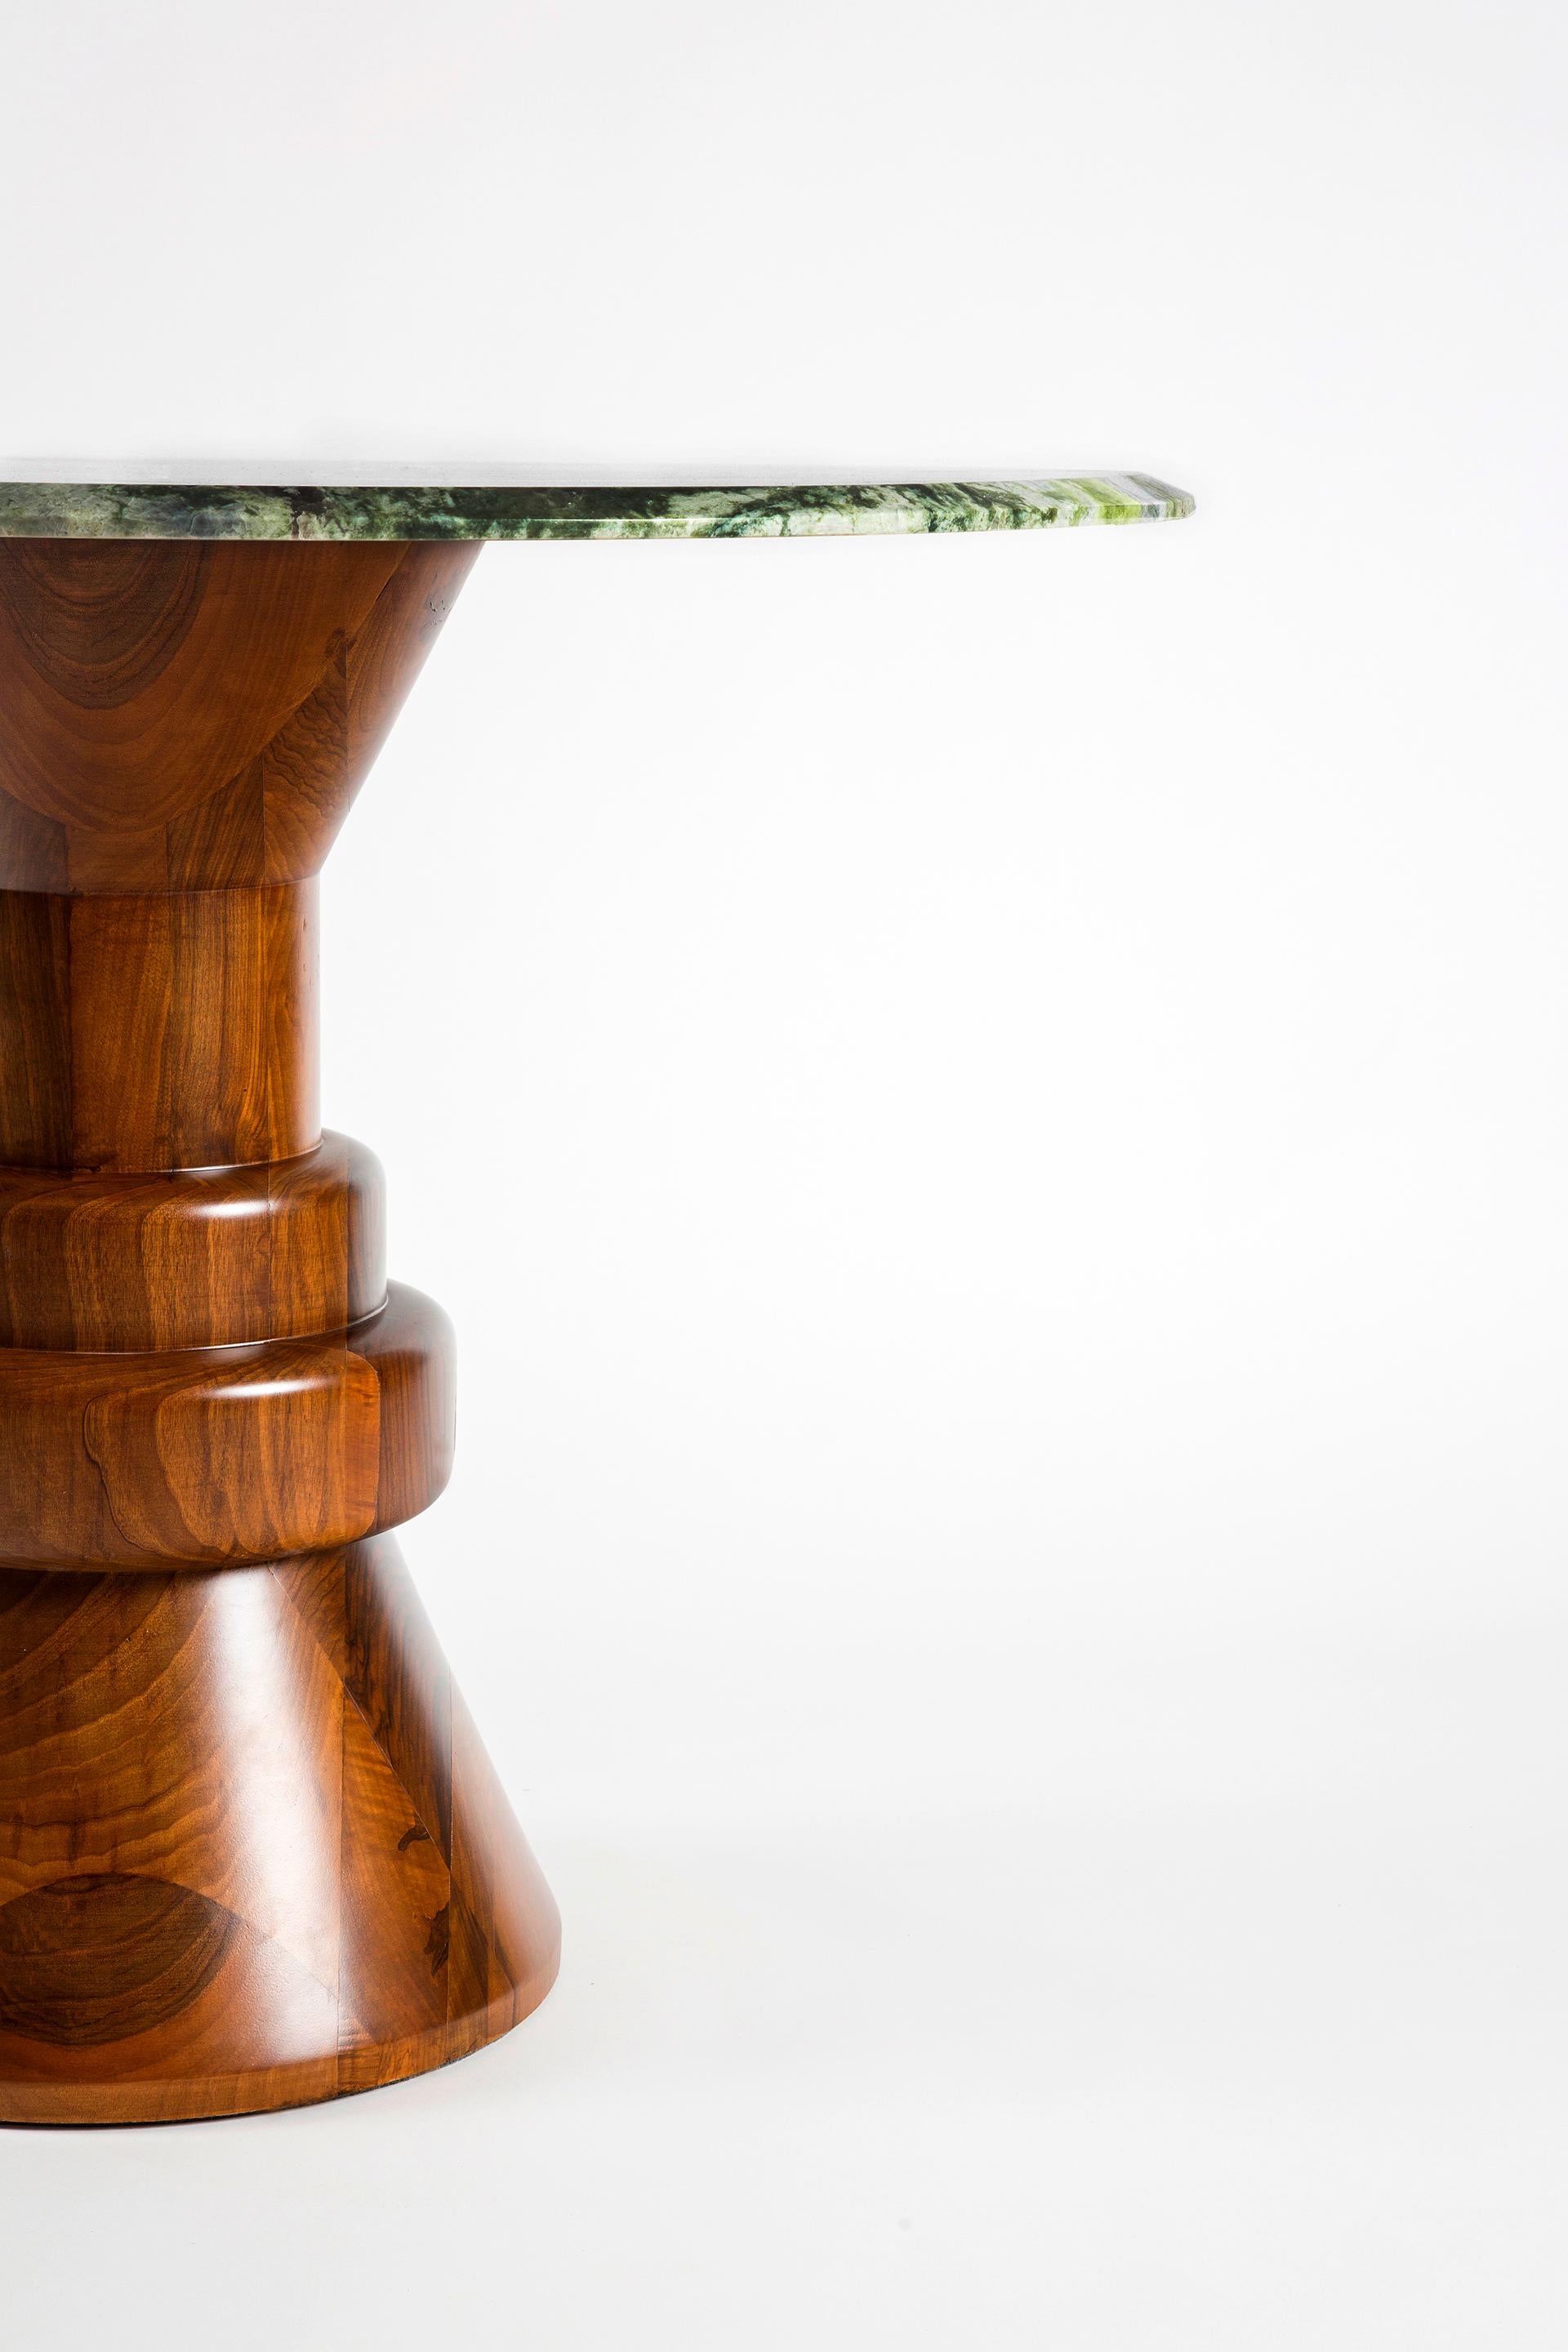 Turkish 21st Century Green Marble Round Dining Table with Sculptural Wooden Base For Sale